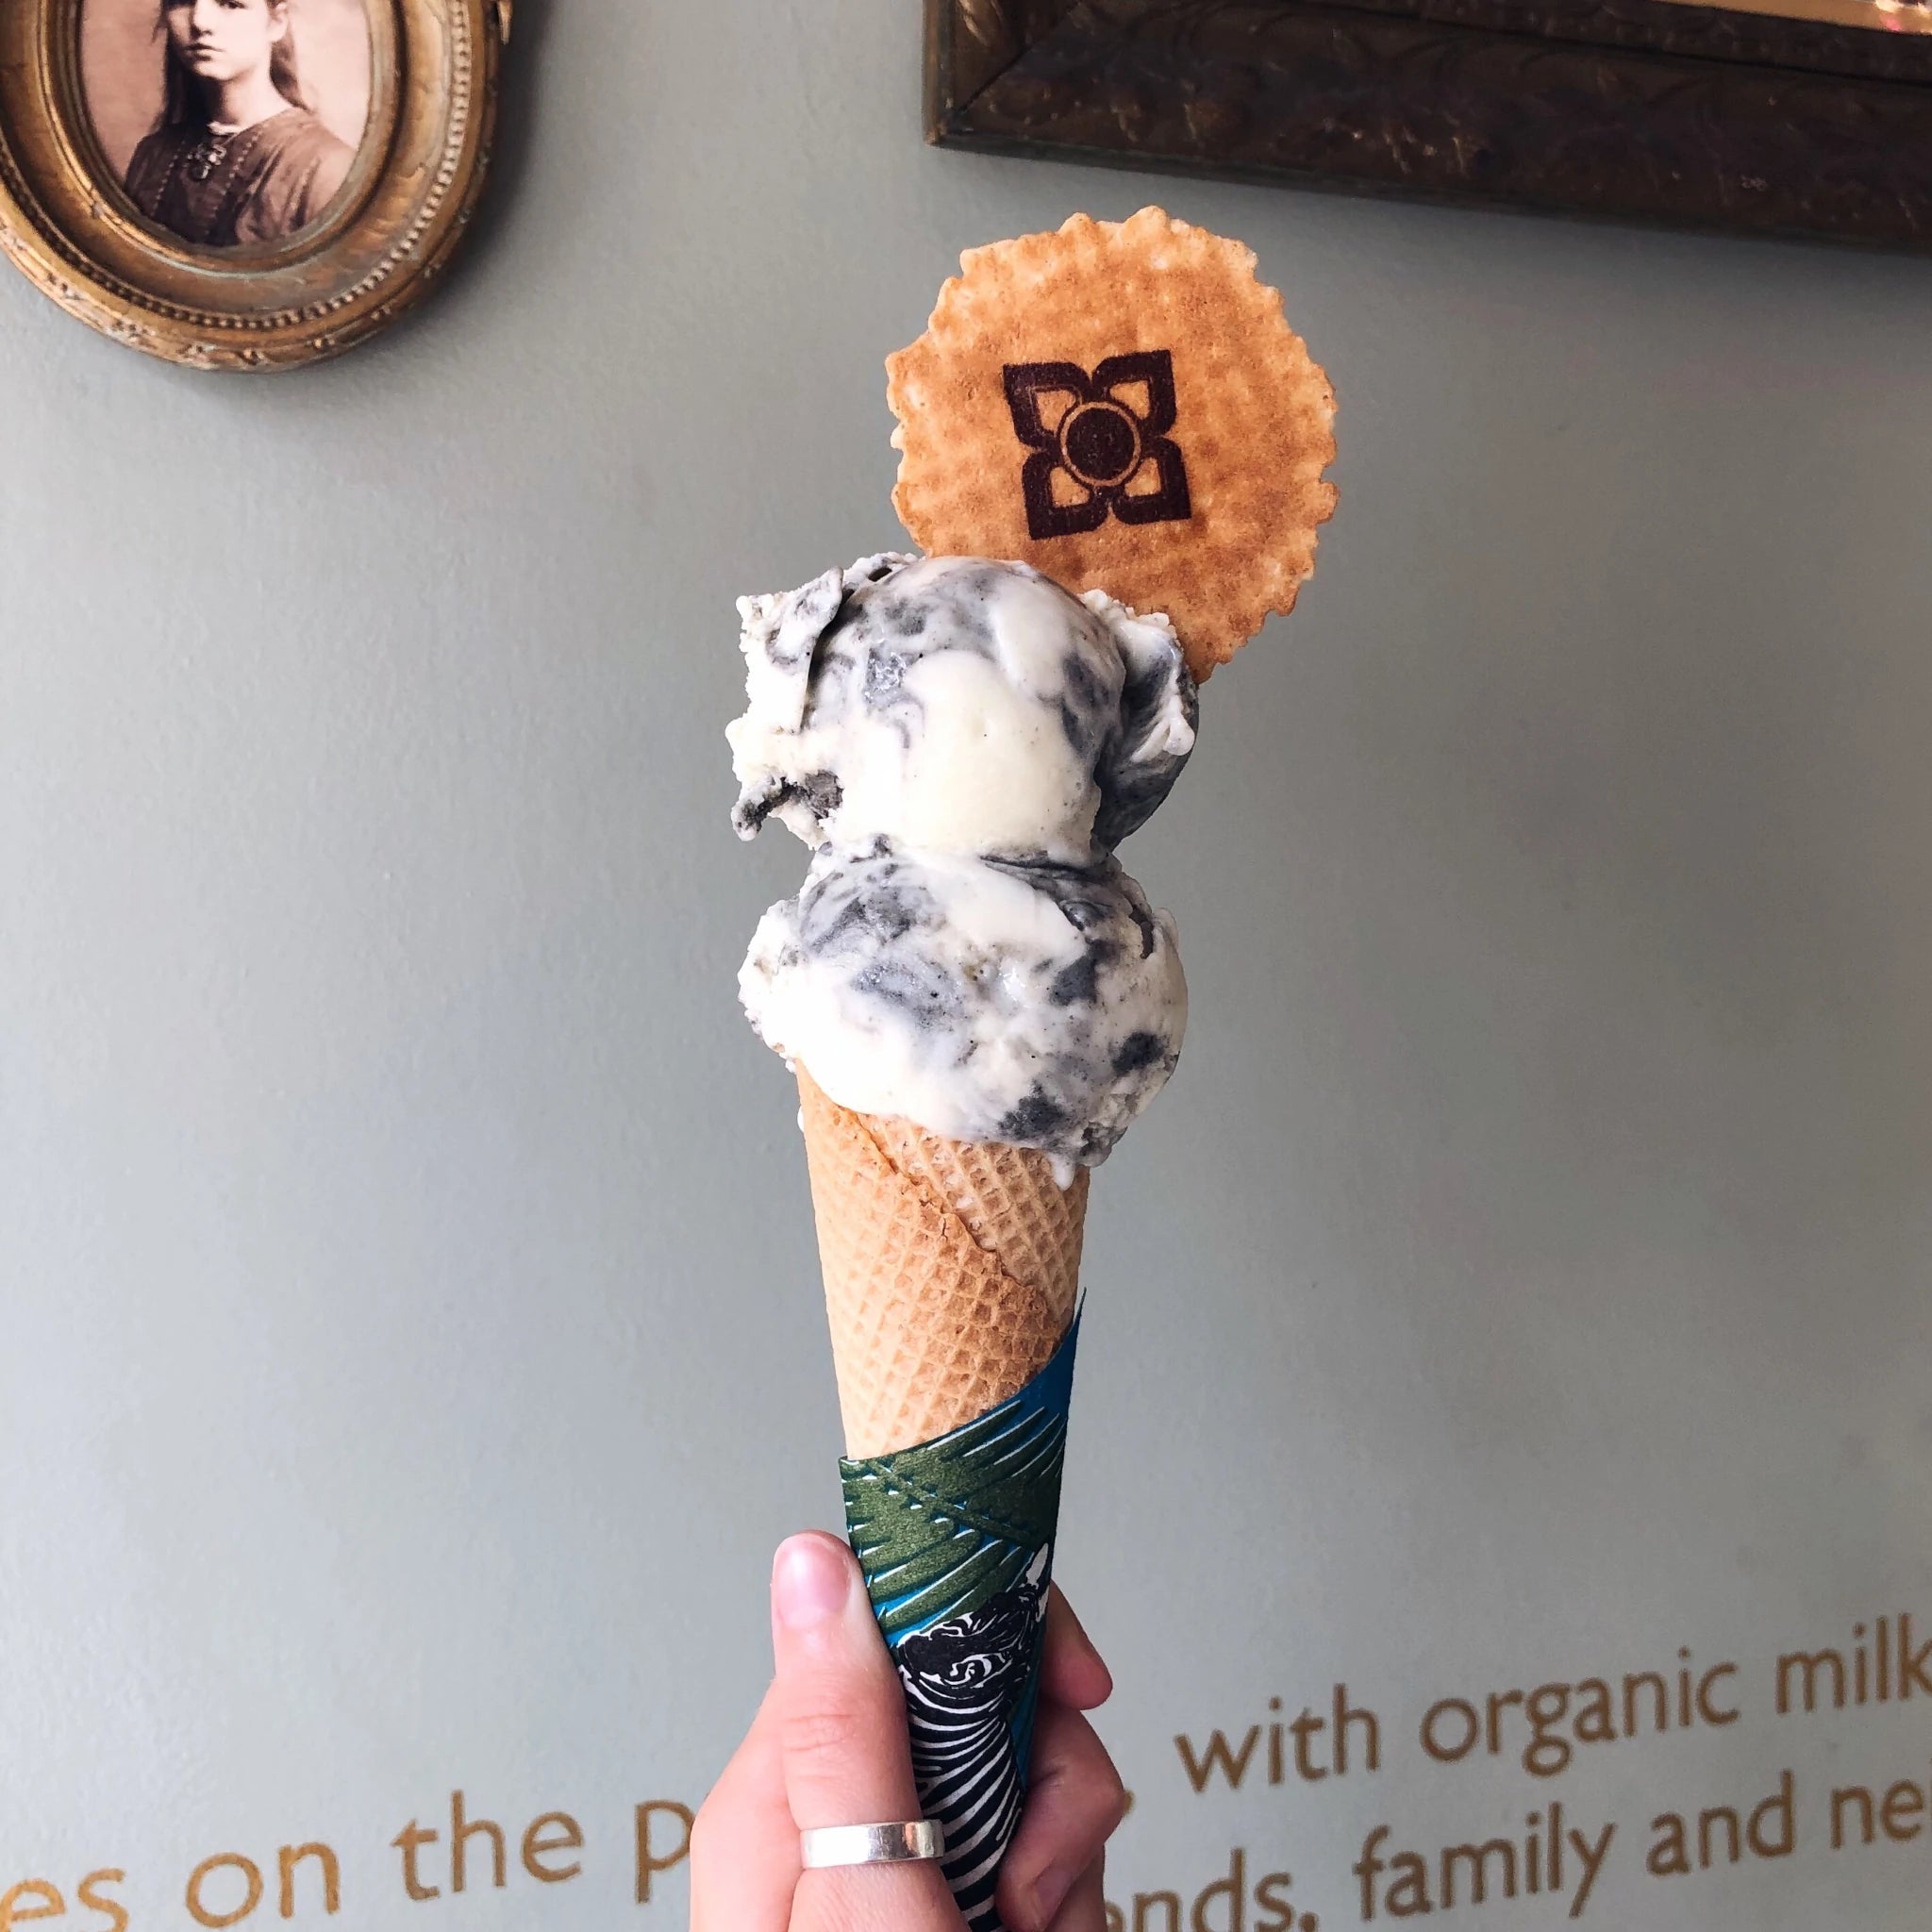 Two scoops of black sesame ice cream on a cone with a wafer